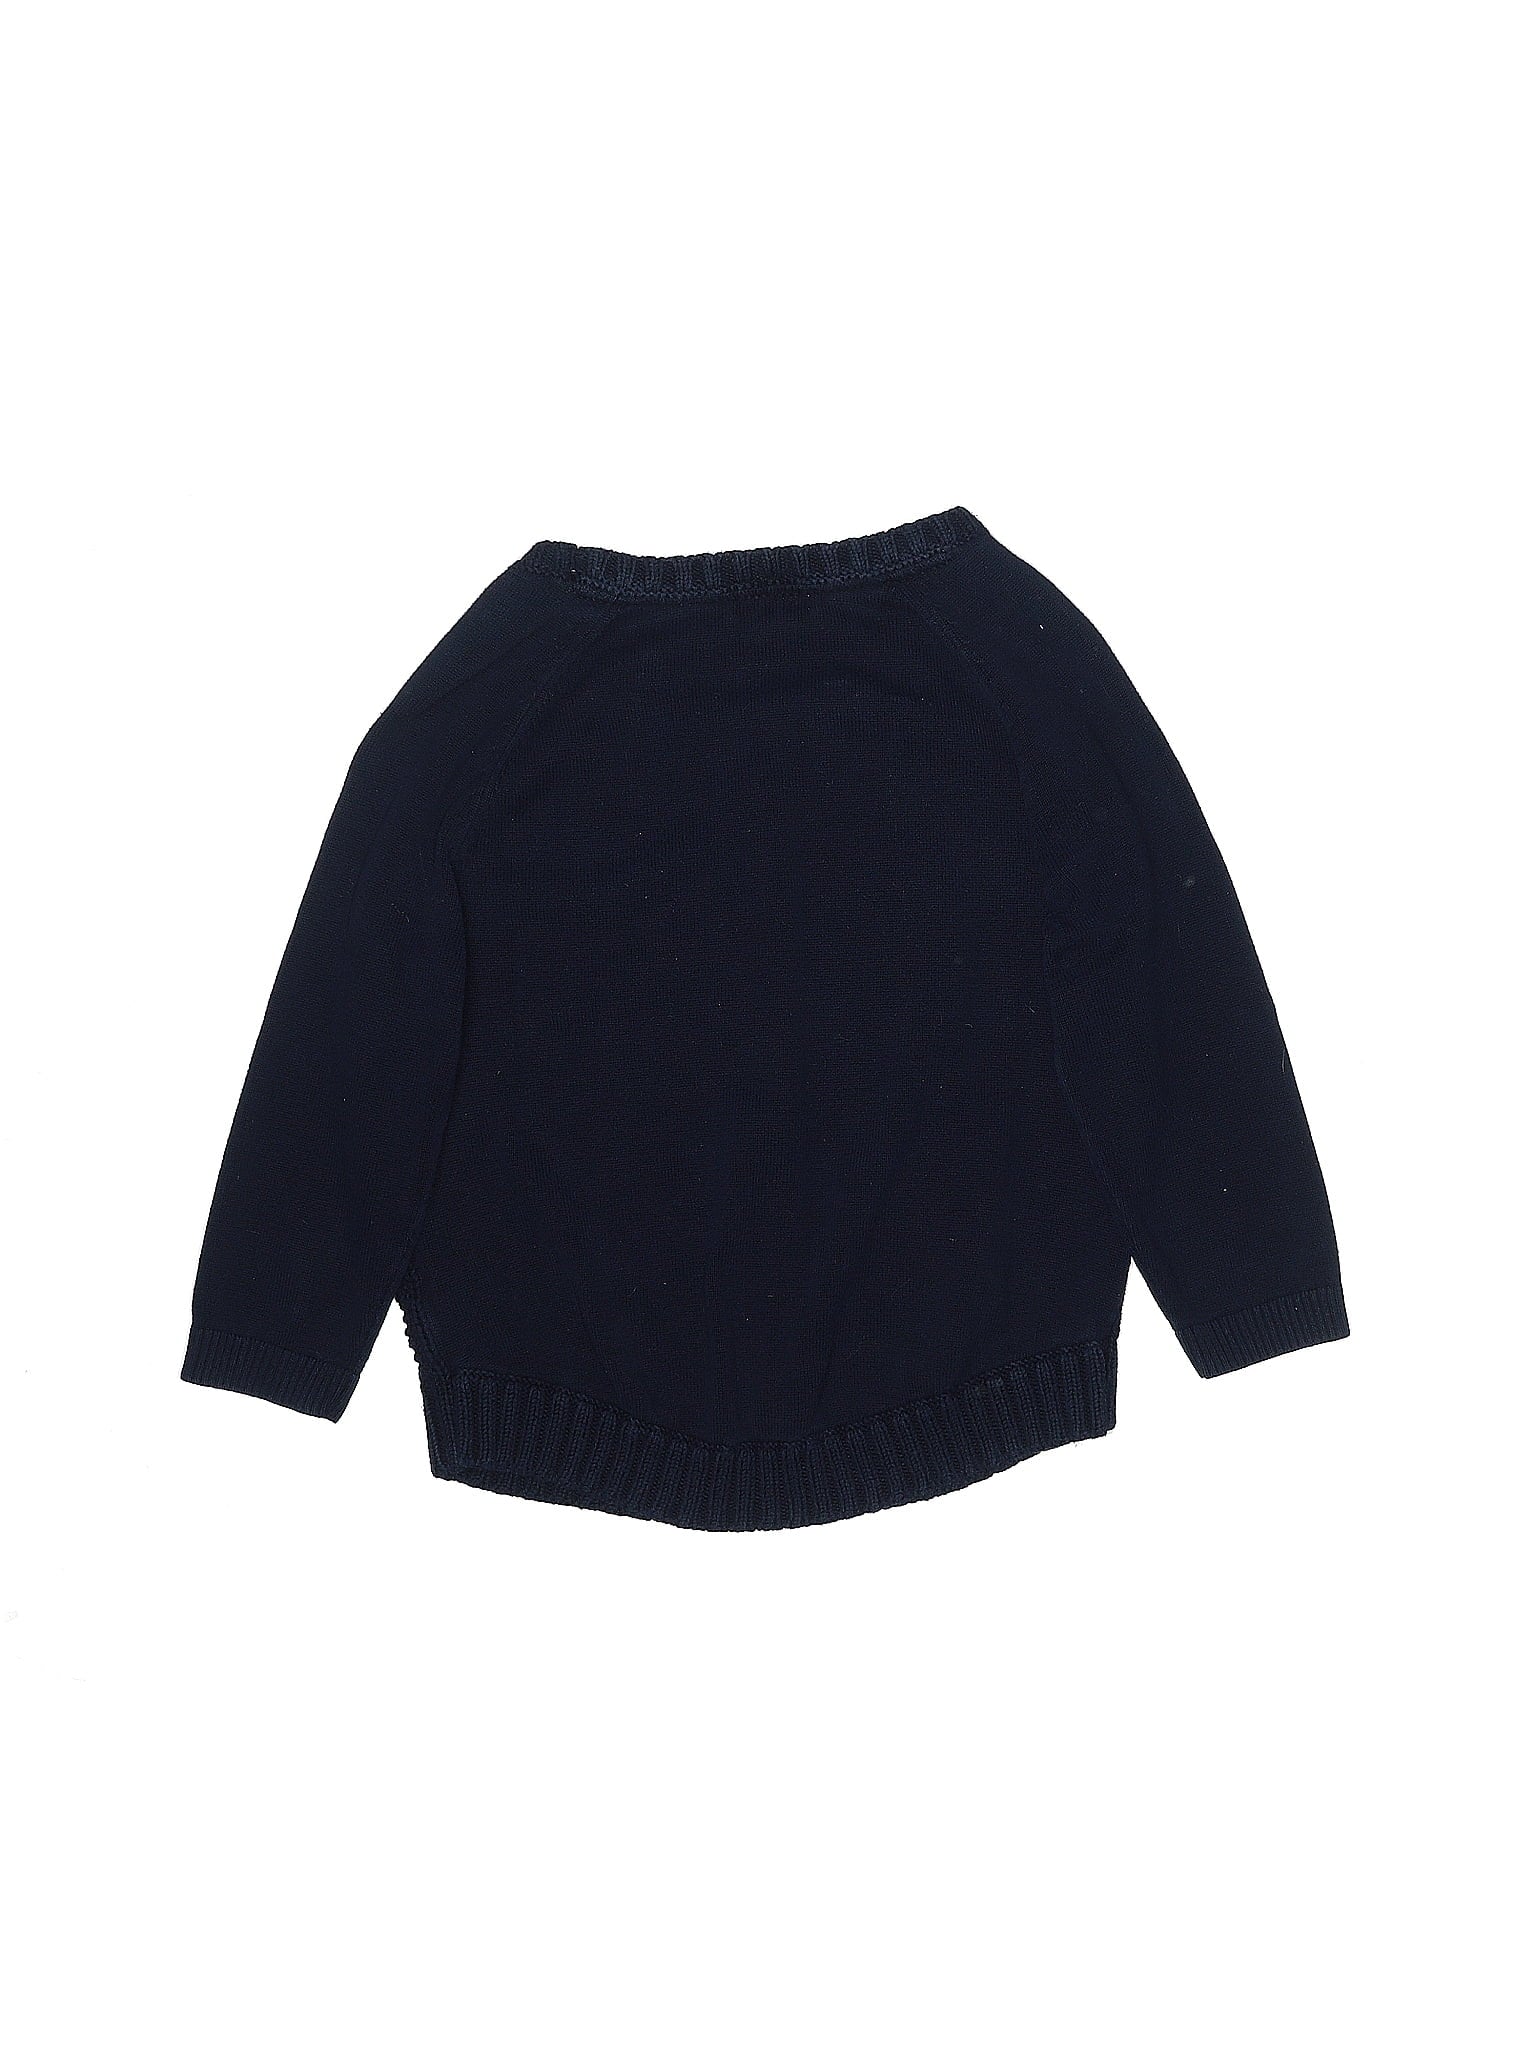 Pullover Sweater size - S (Youth)